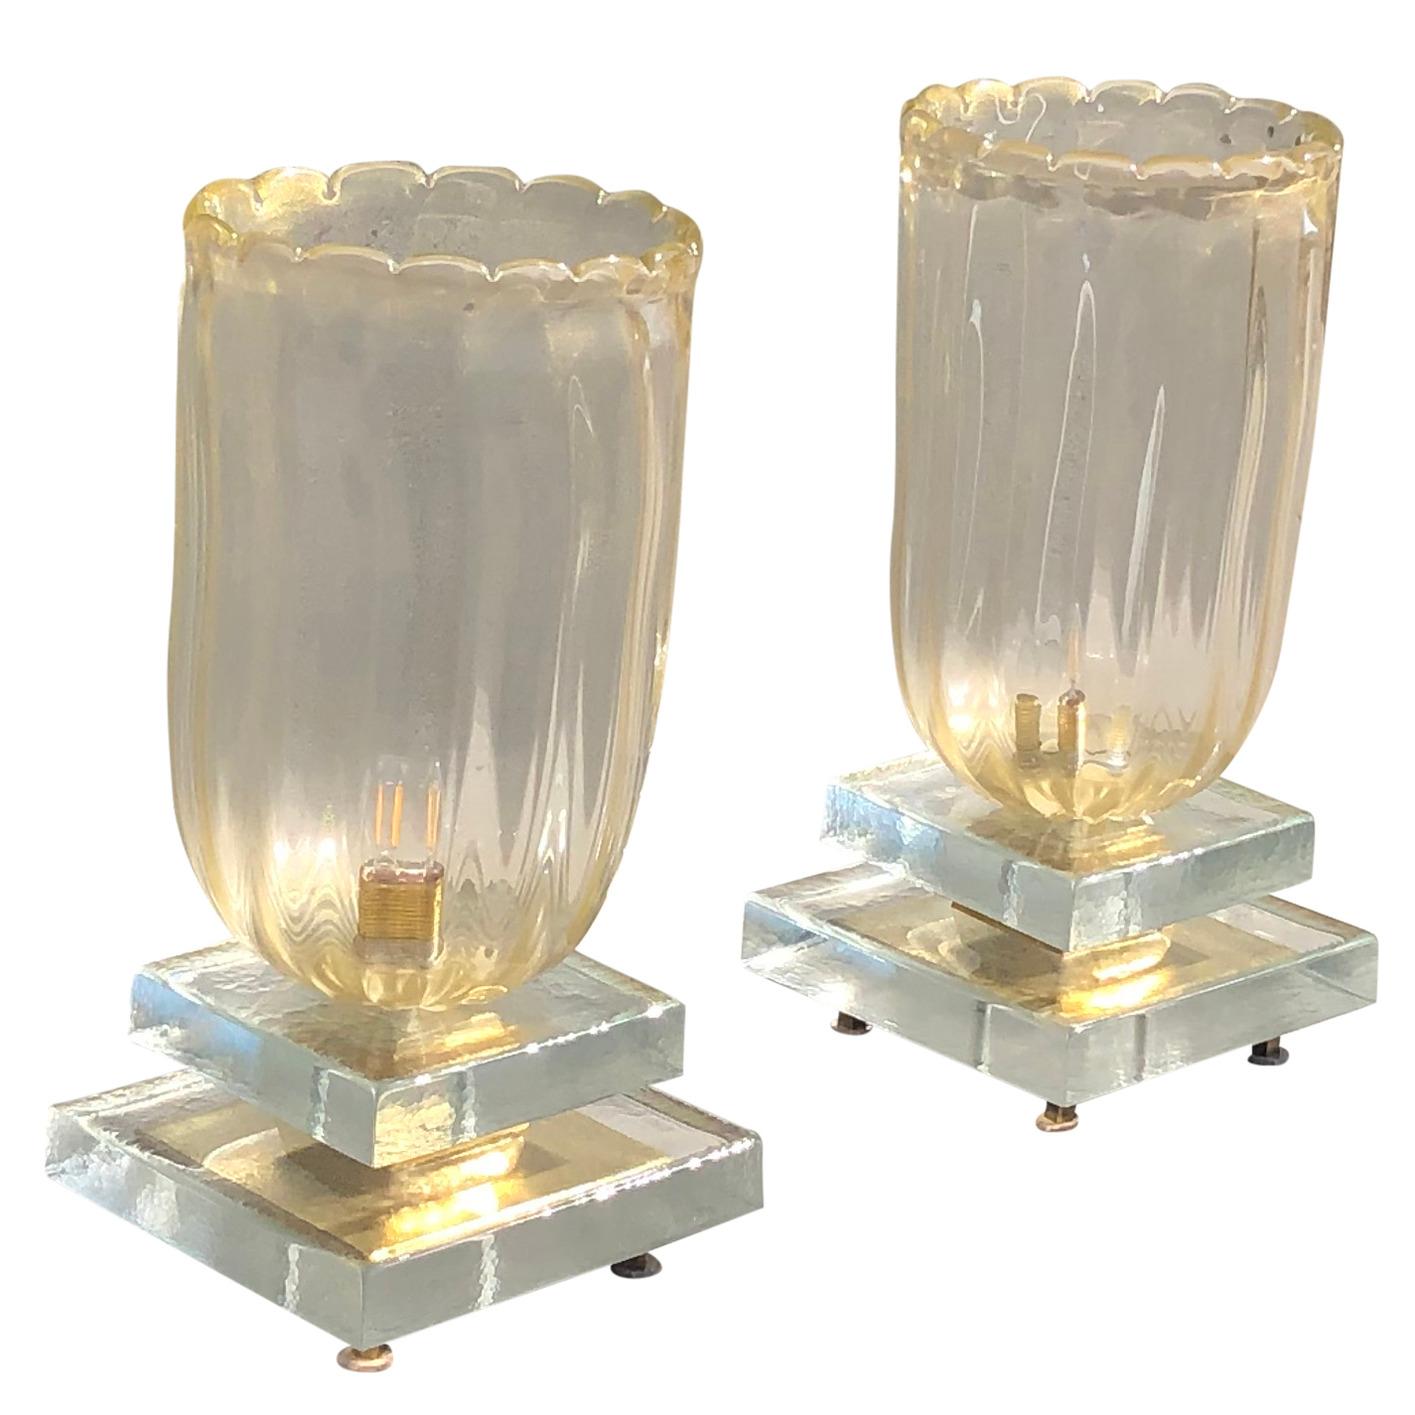 A pair of crystal glass vanity lamps. The design is enhanced by a very detailed tridimensional decoration. The table lamps are made of polypro crystal and 18 carat gold flakes. Wear consistent with age and use, circa 1930, Italy.